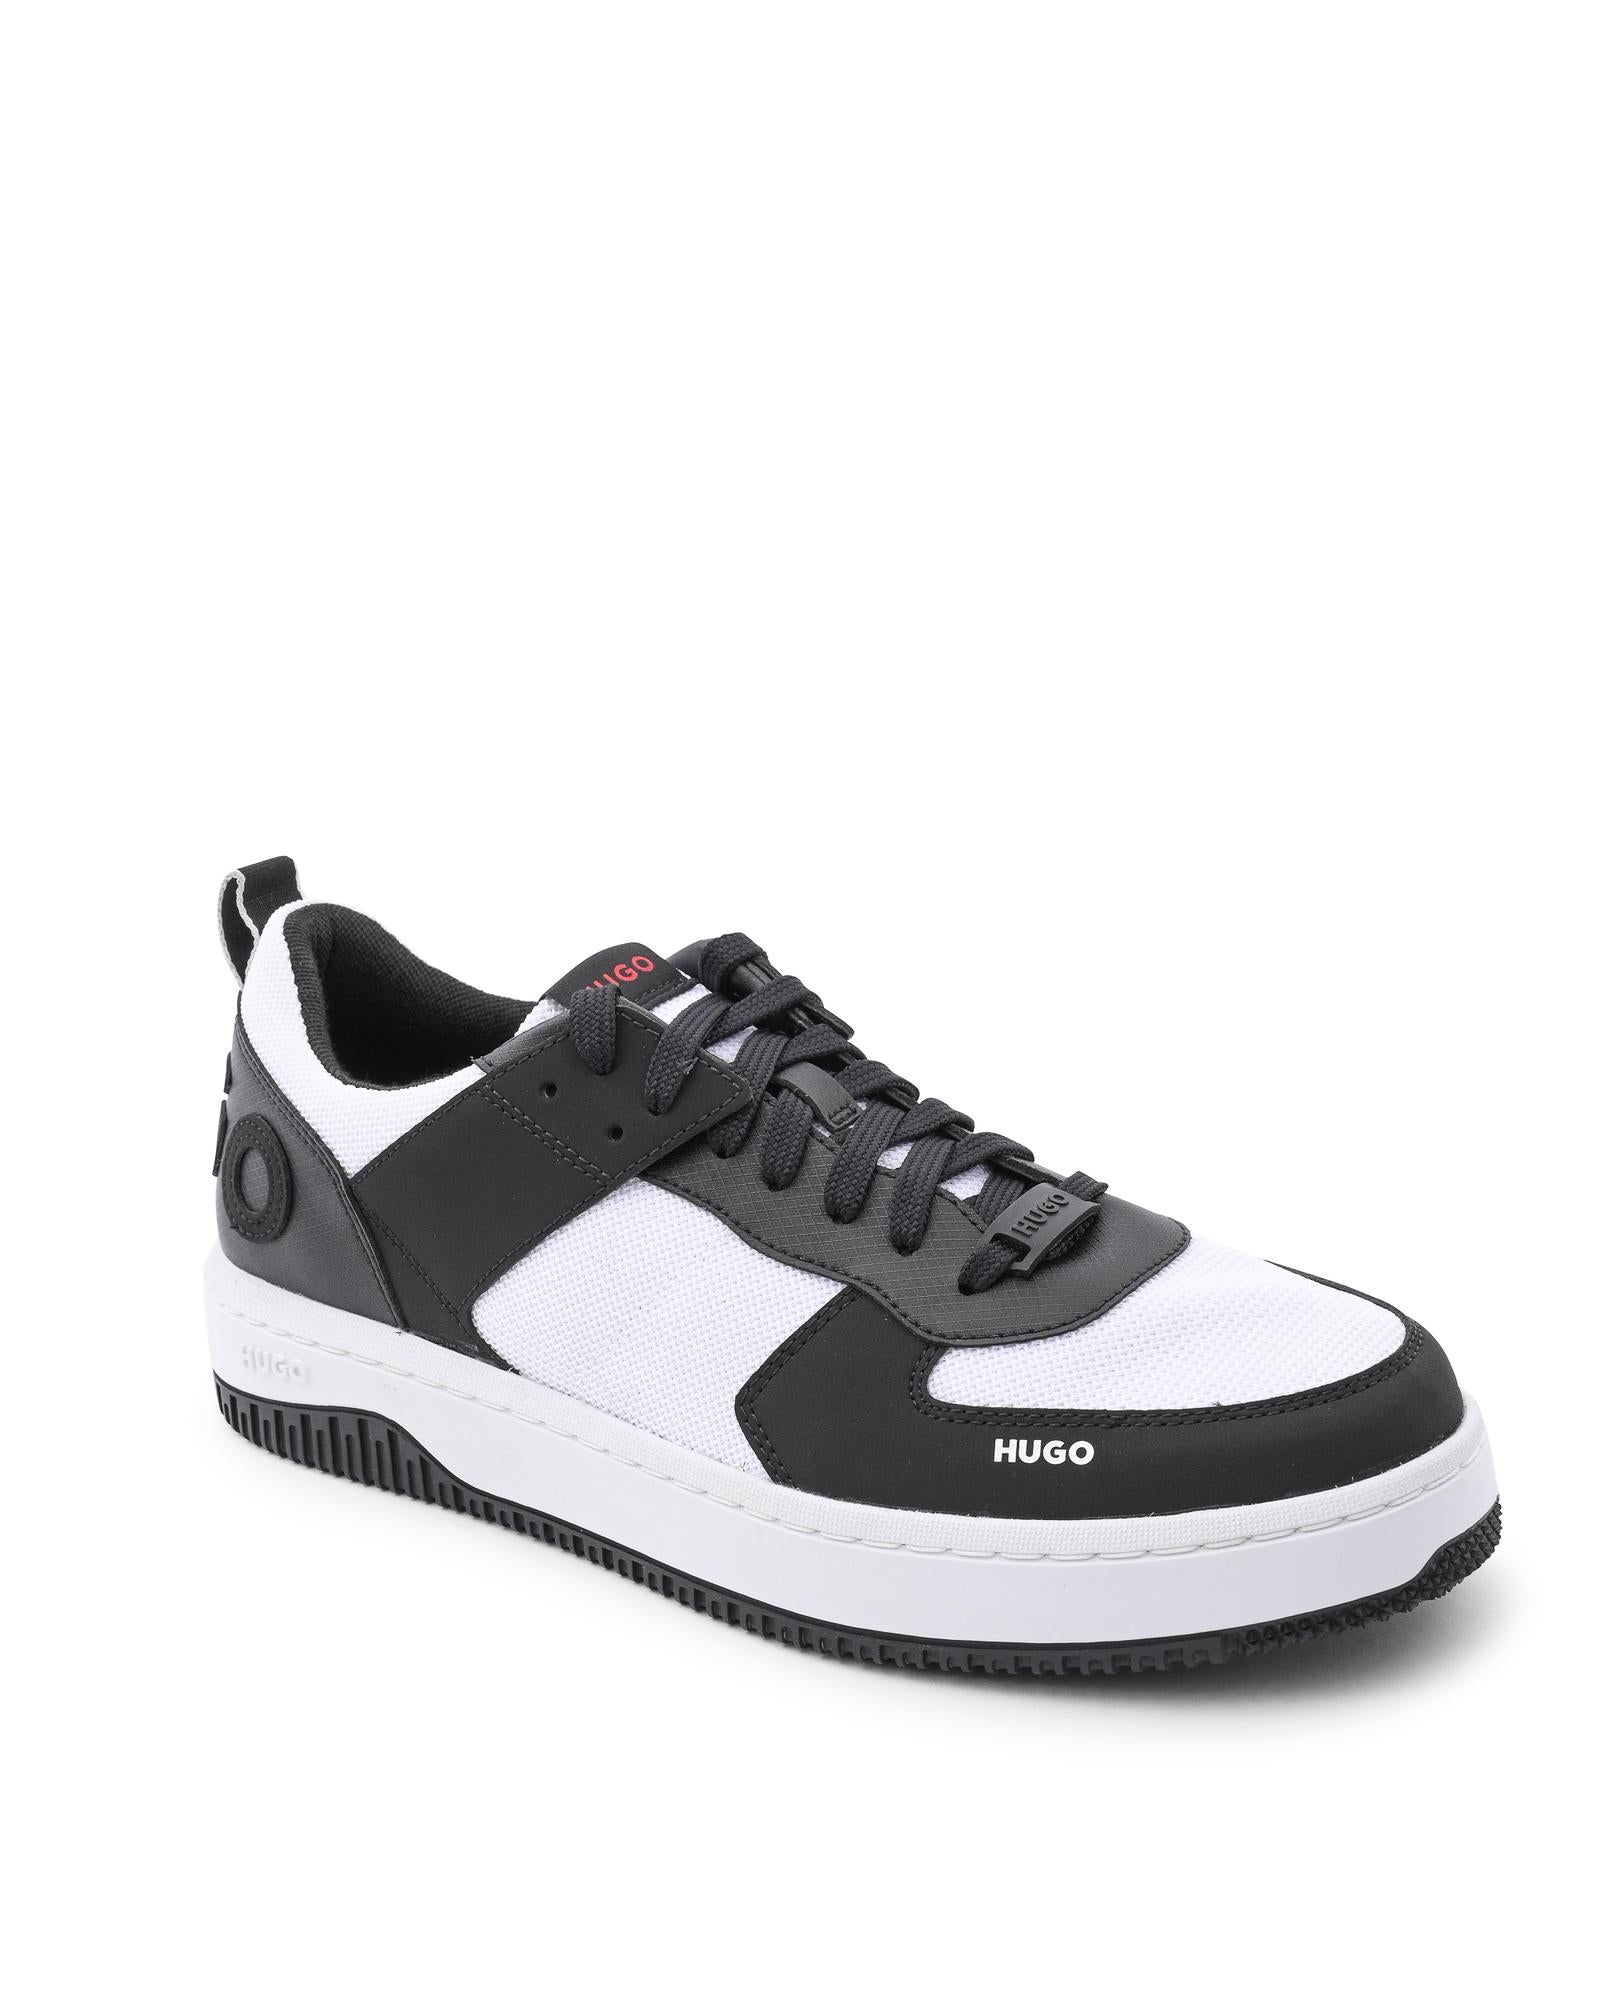 Men's Charcoal Calfskin Sneakers with Rubber Sole in Multicolor - 45 EU